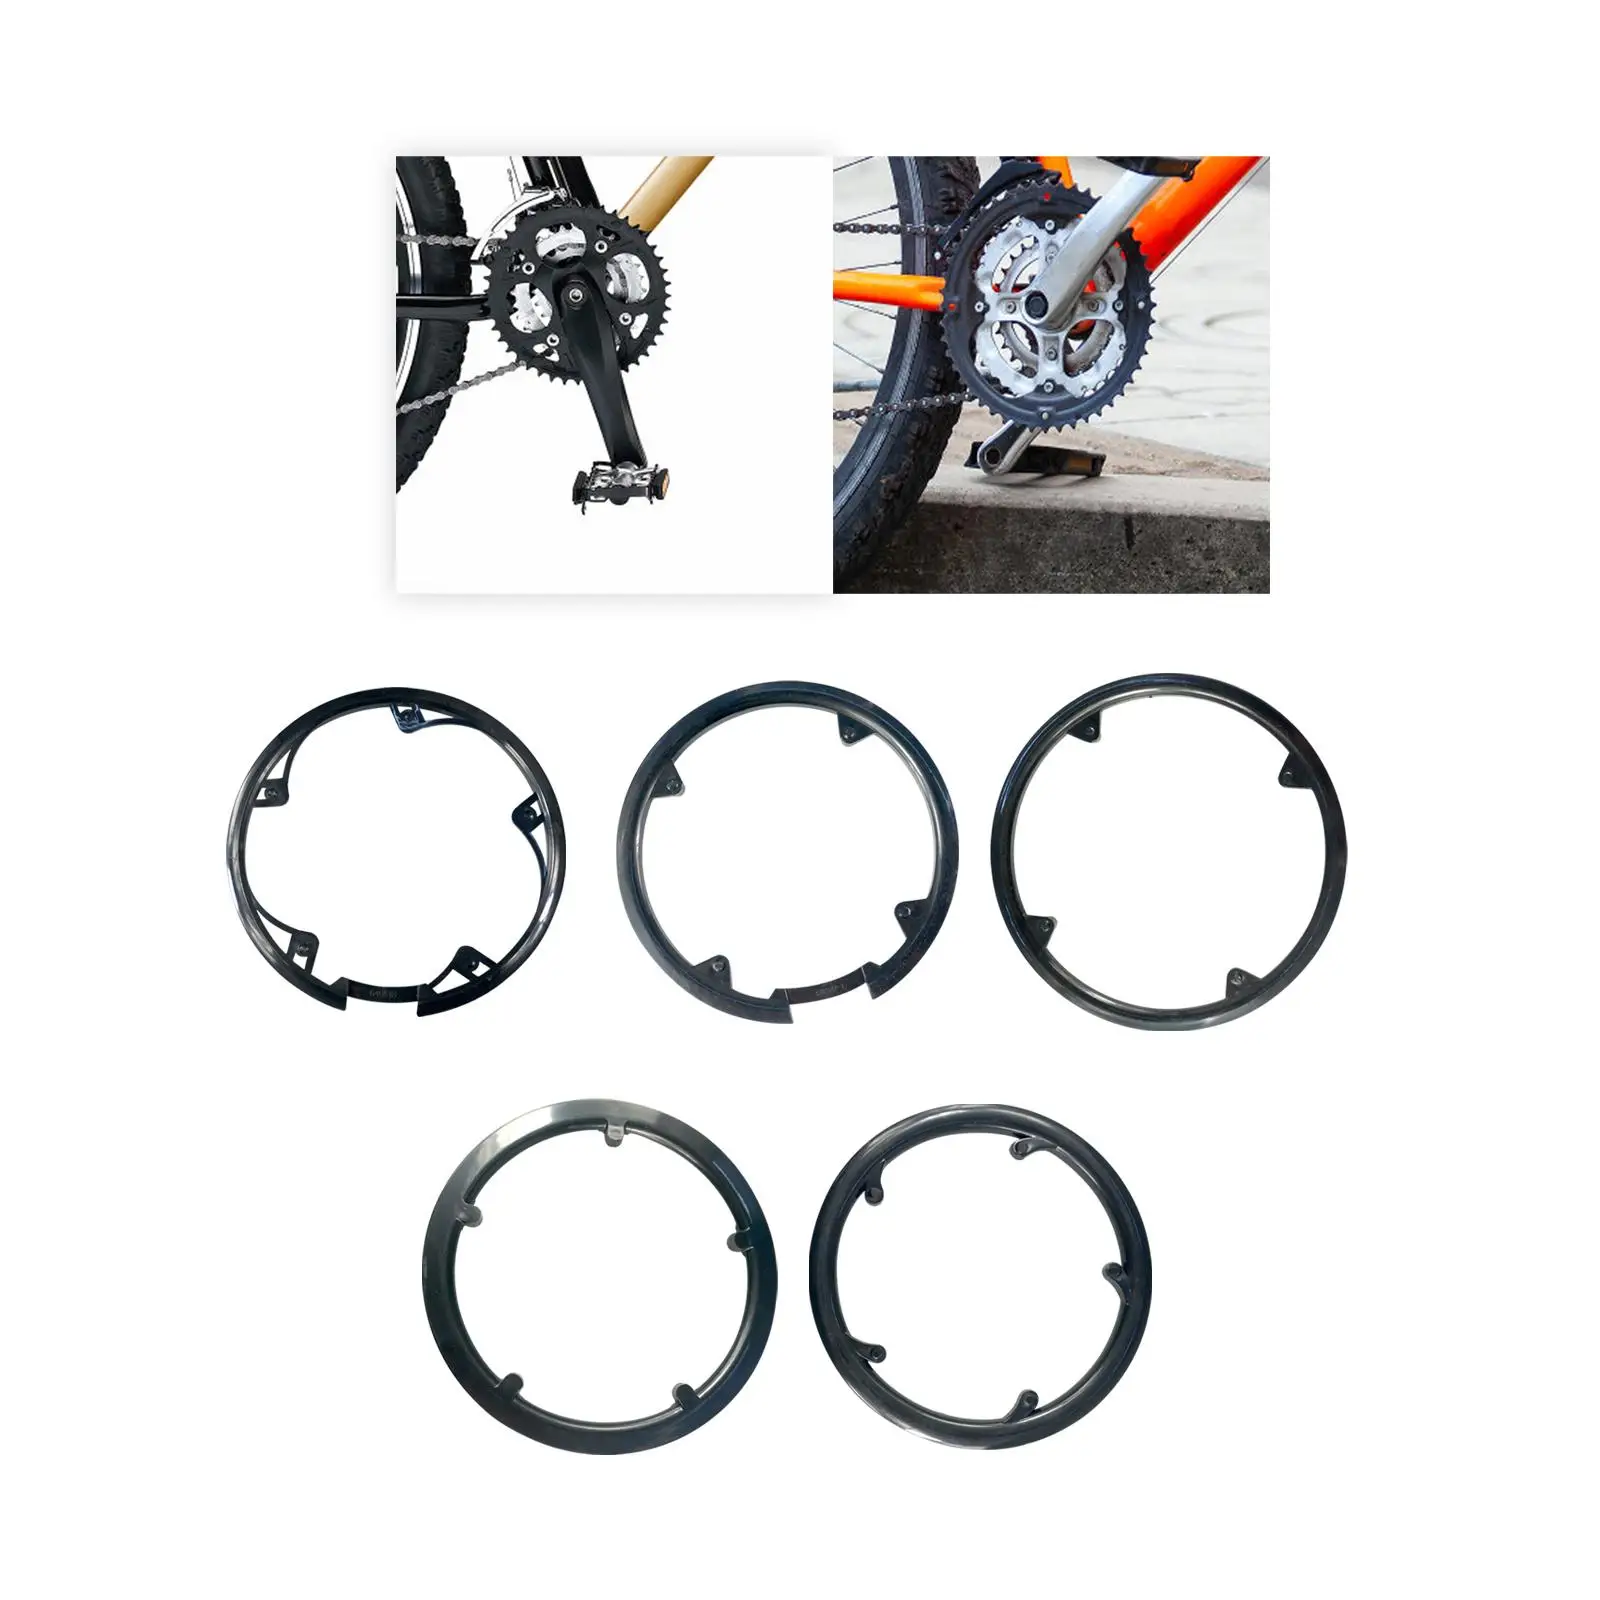 Bike Chain Wheel Protector Round for Bicycle BMX Bicycle Chainring Sprockets